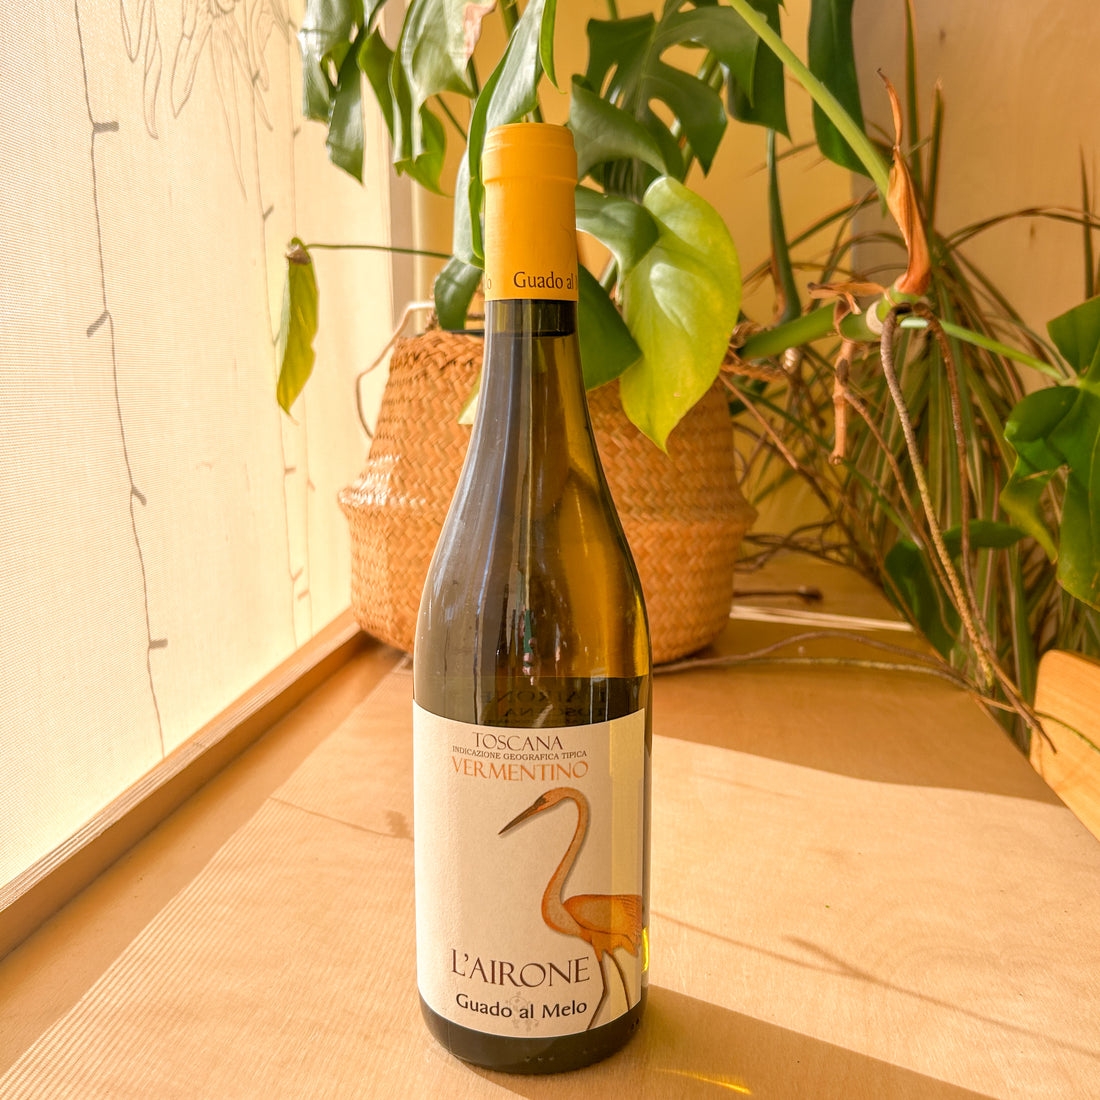 A bottle of white wine. The label reads: "Toscana Vermentino. L&